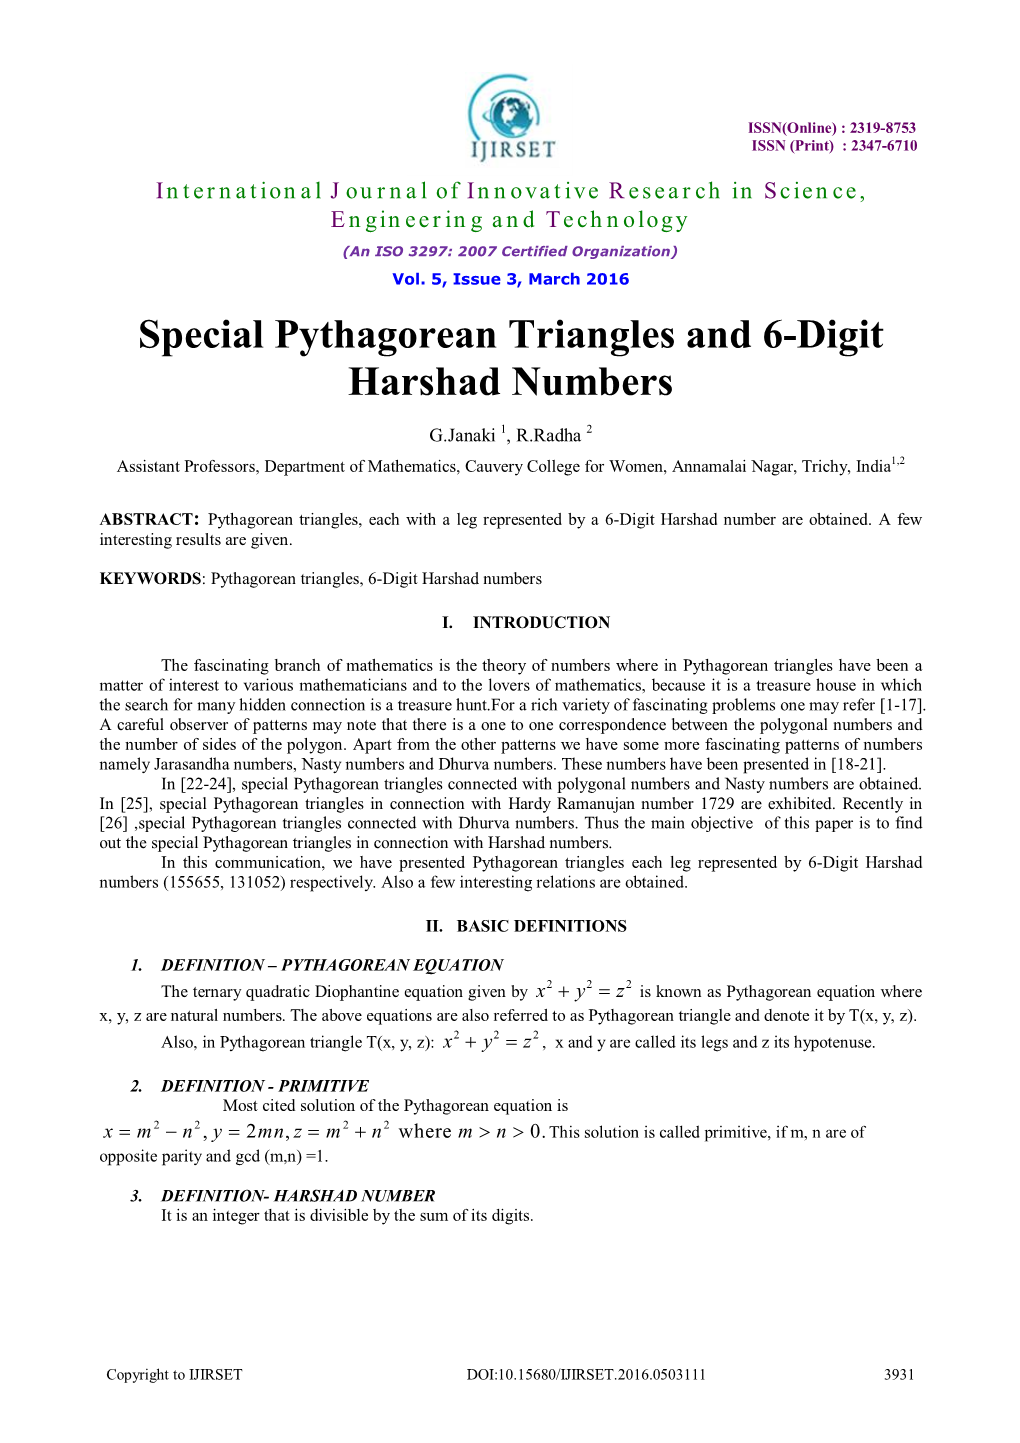 Special Pythagorean Triangles and 6-Digit Harshad Numbers